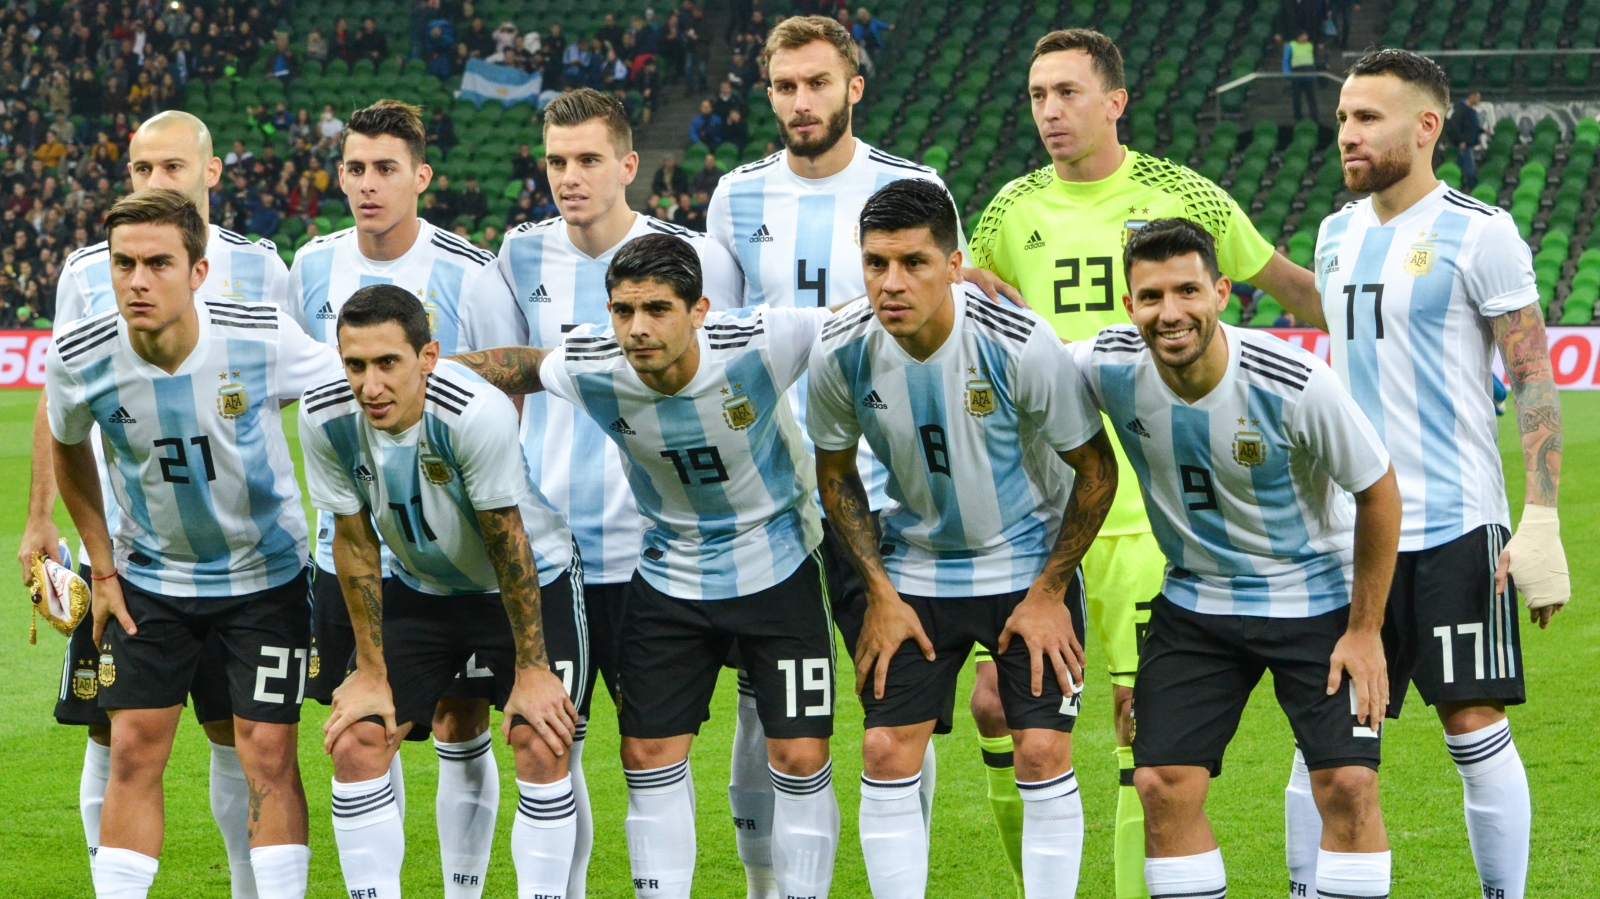 The Argentina National Football Team, captained by Lionel Messi. Photo by Vlad1988/Shutterstock.com